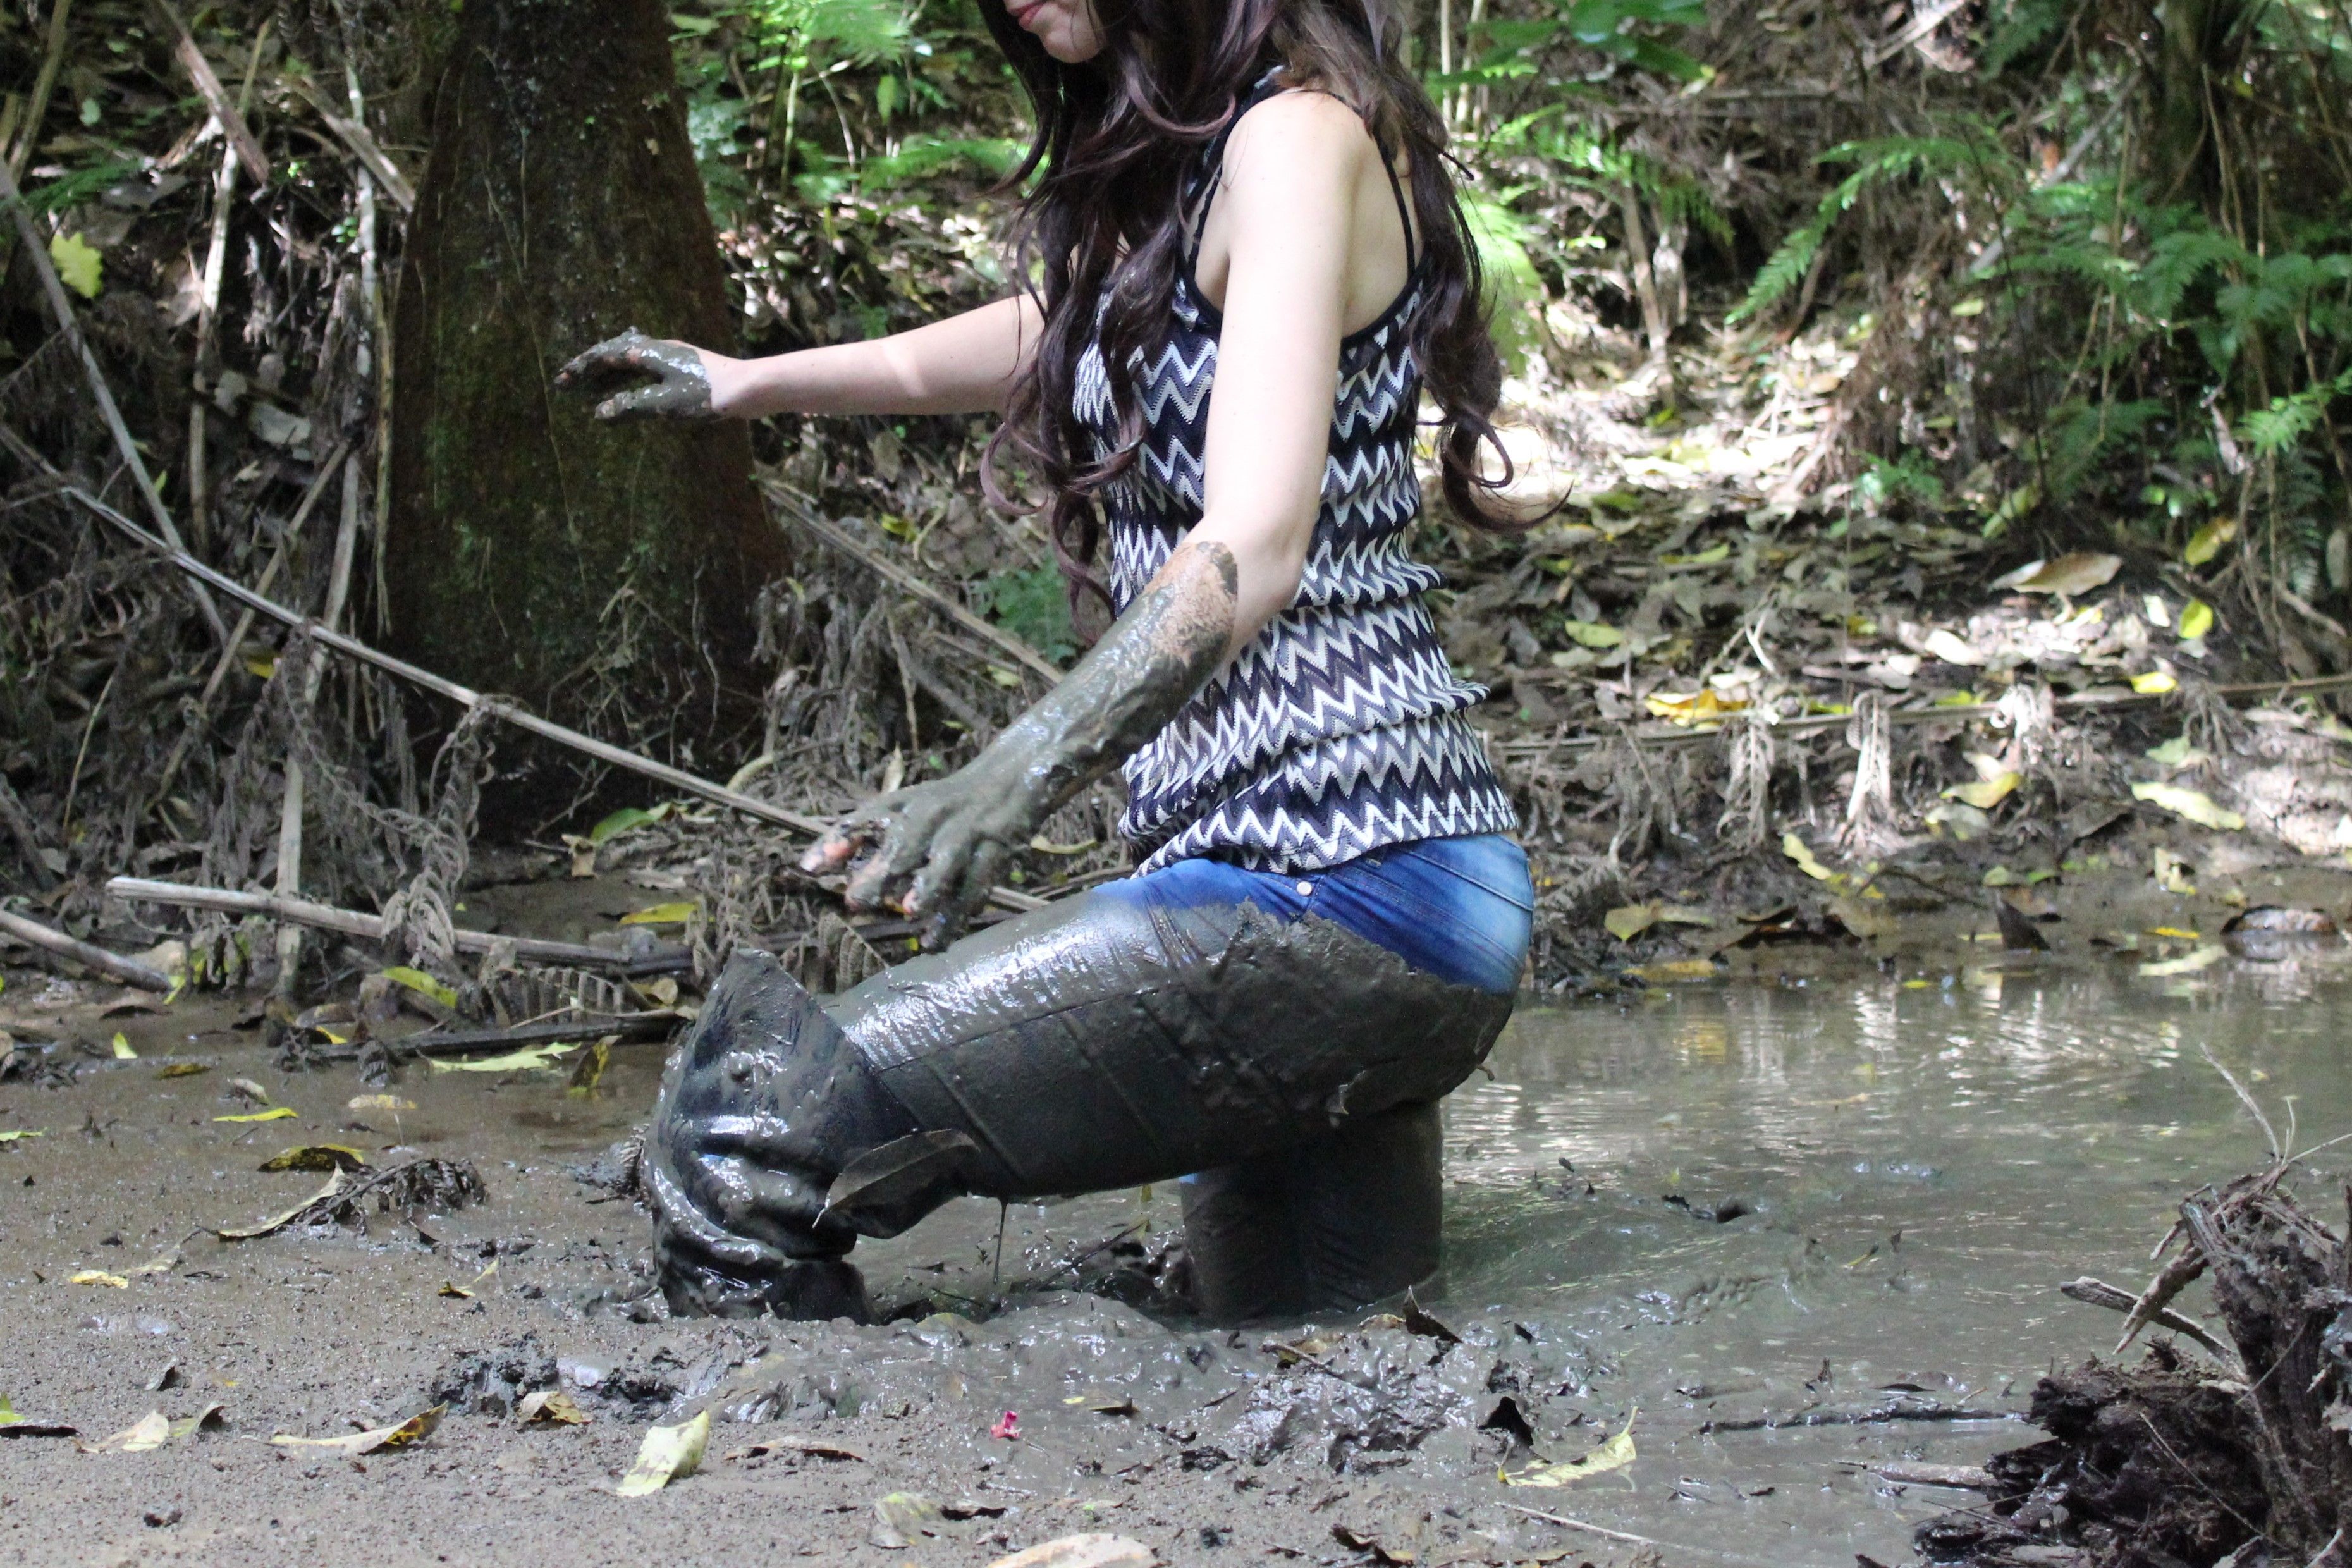 christina raby recommends thigh high boots in mud pic